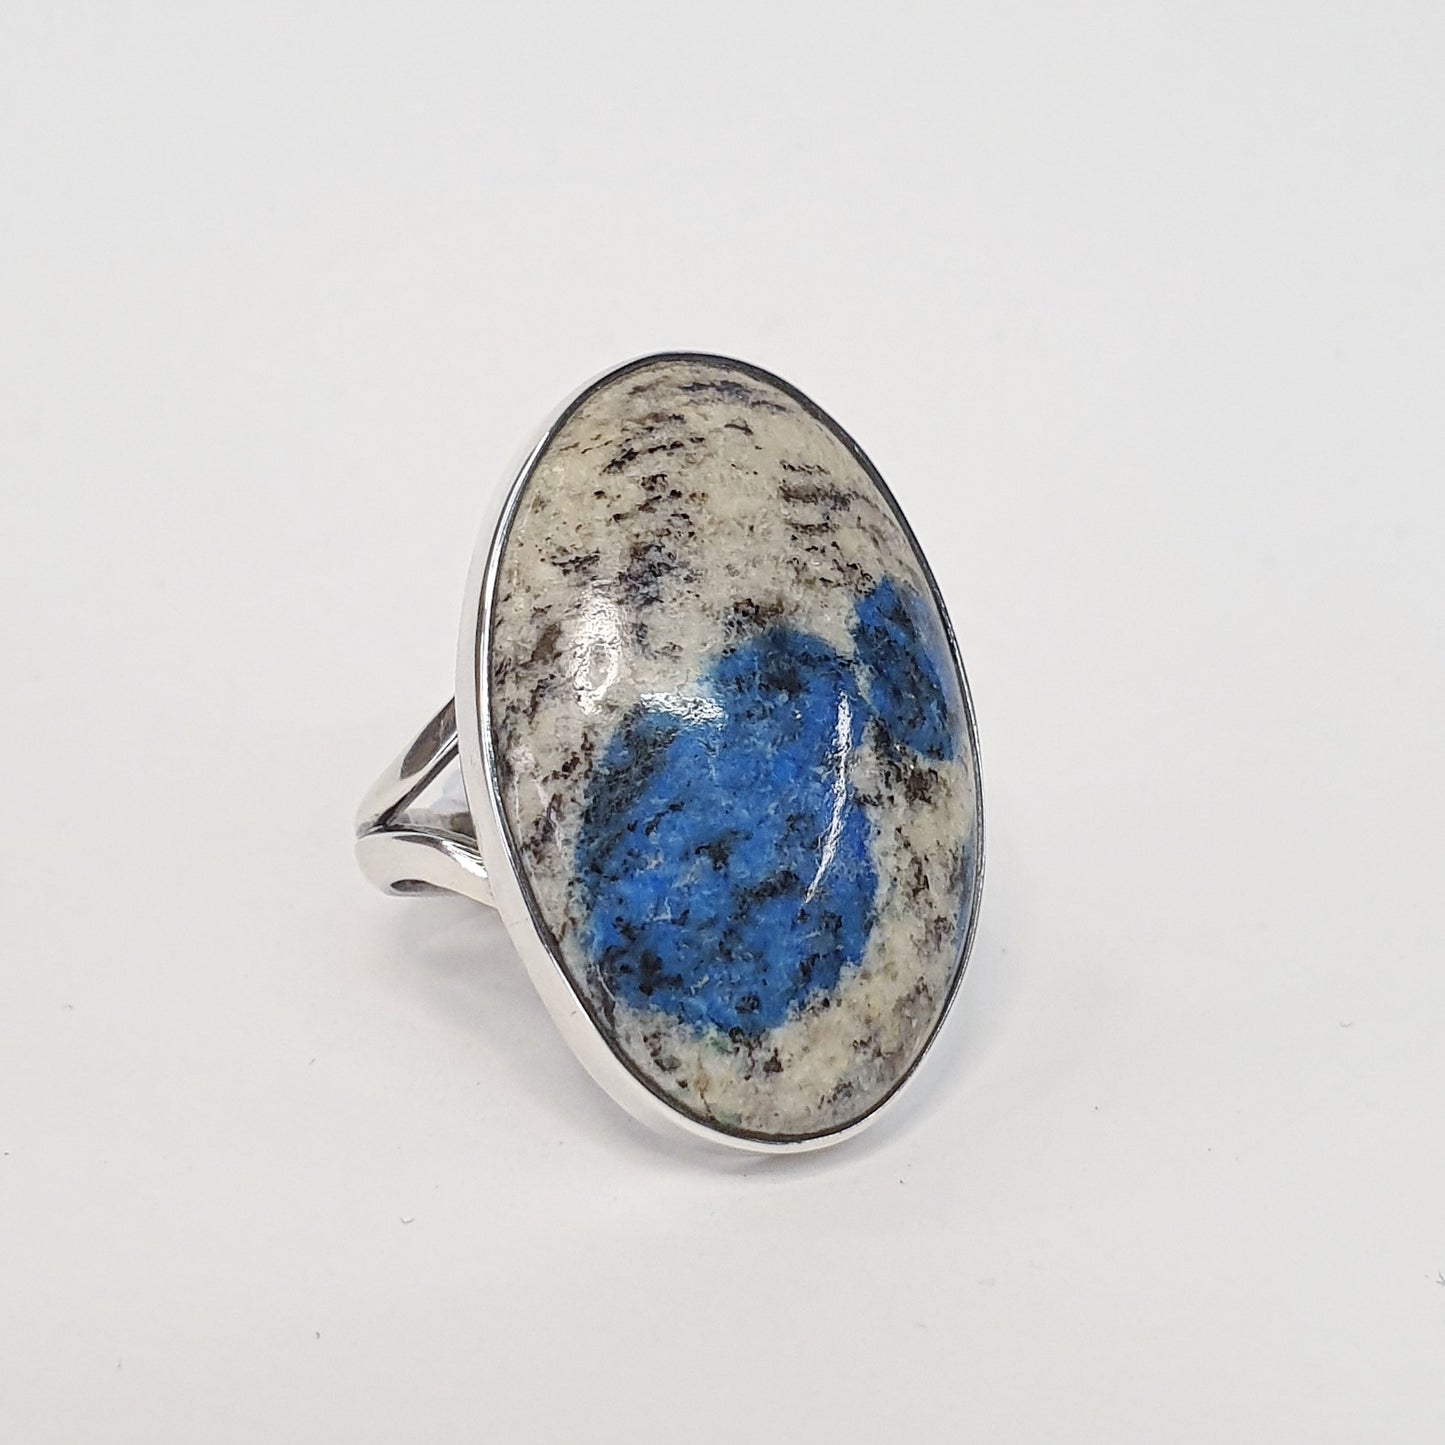 K2 Azurite Ring - Size 7.5/P - ON SALE